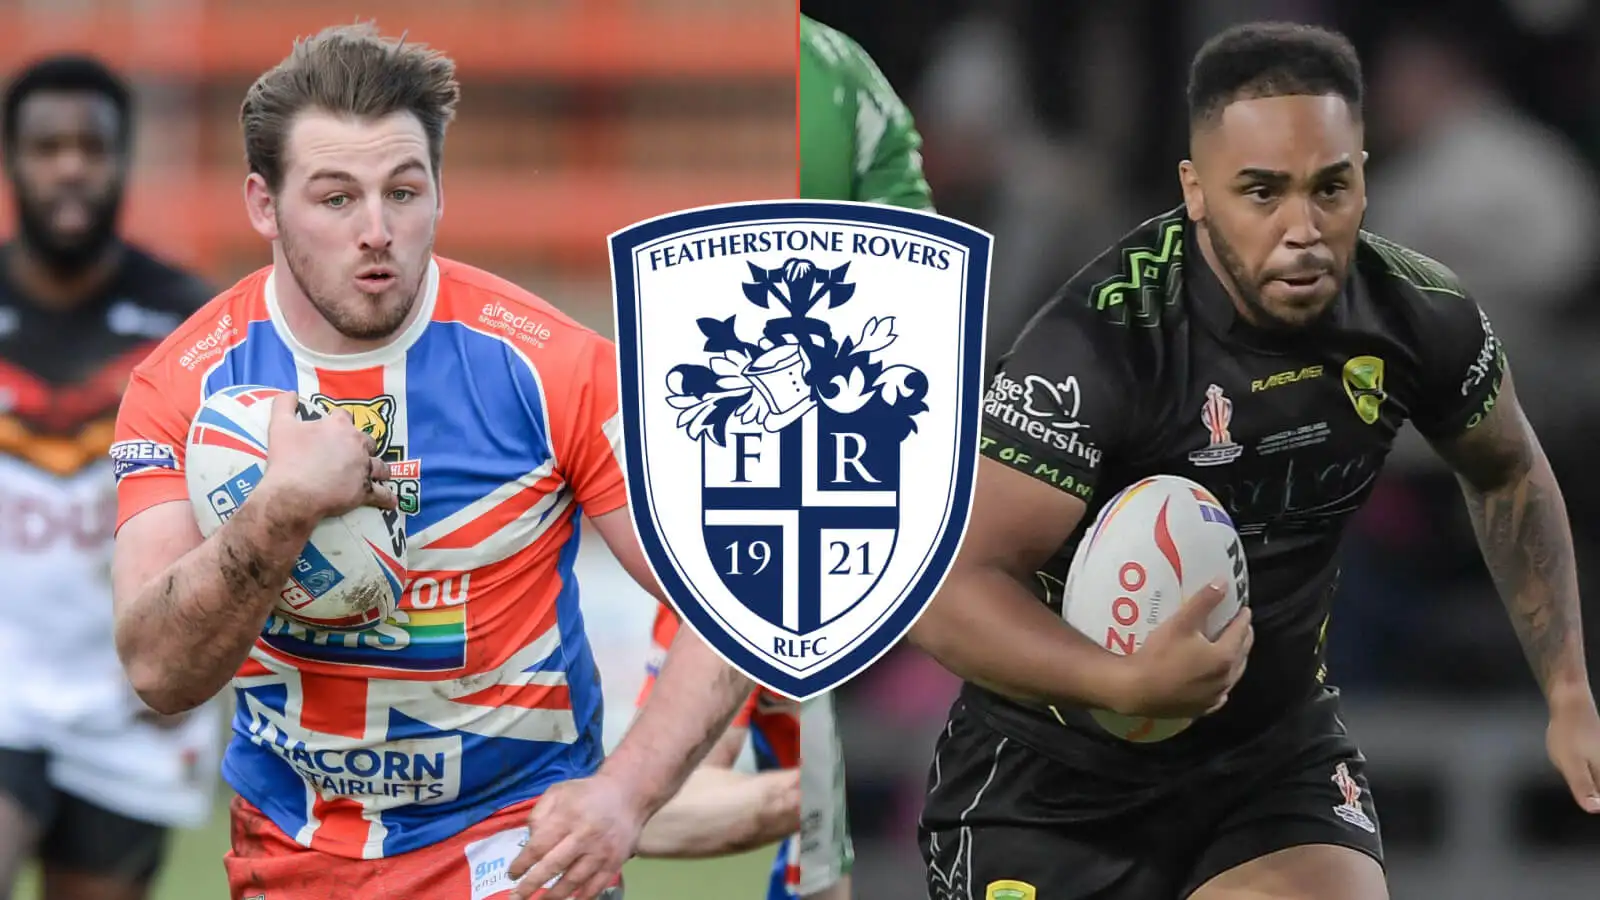 Featherstone Rovers hand quartet permanent deals following successful trials, including Jamaica international & ex-Castleford Tigers youngster